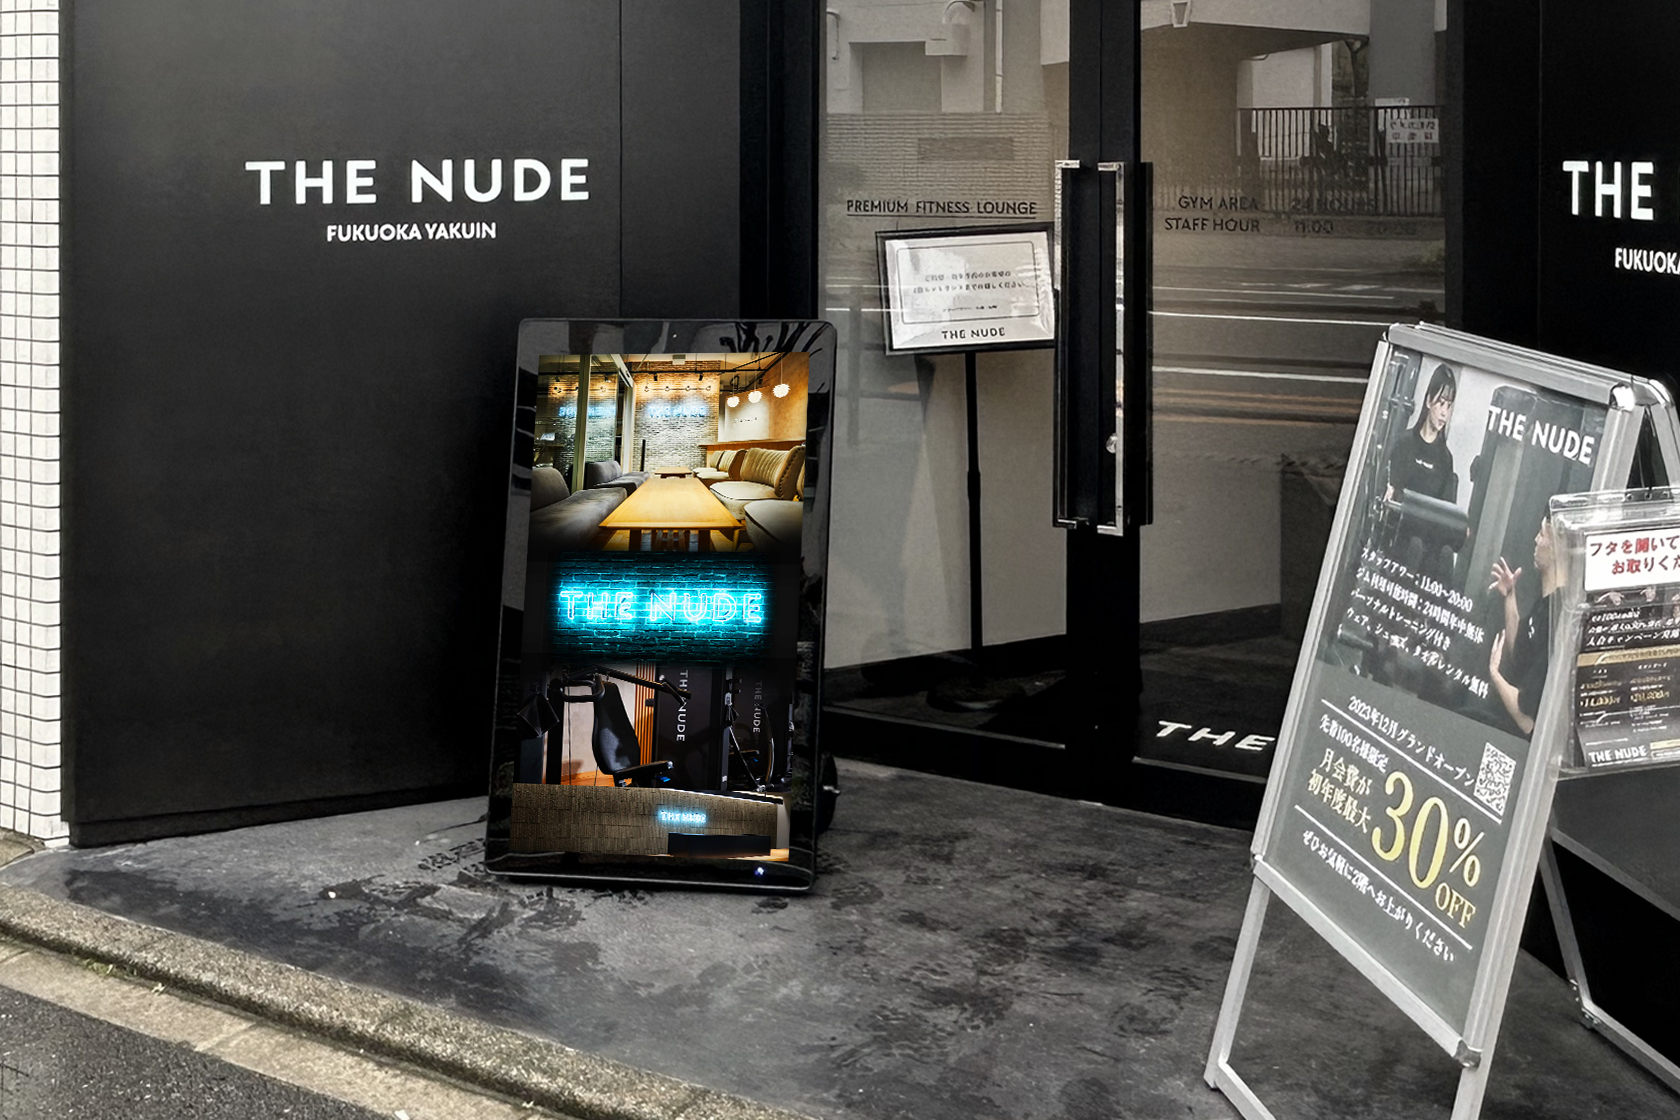 THE NUDE 福岡薬院店様